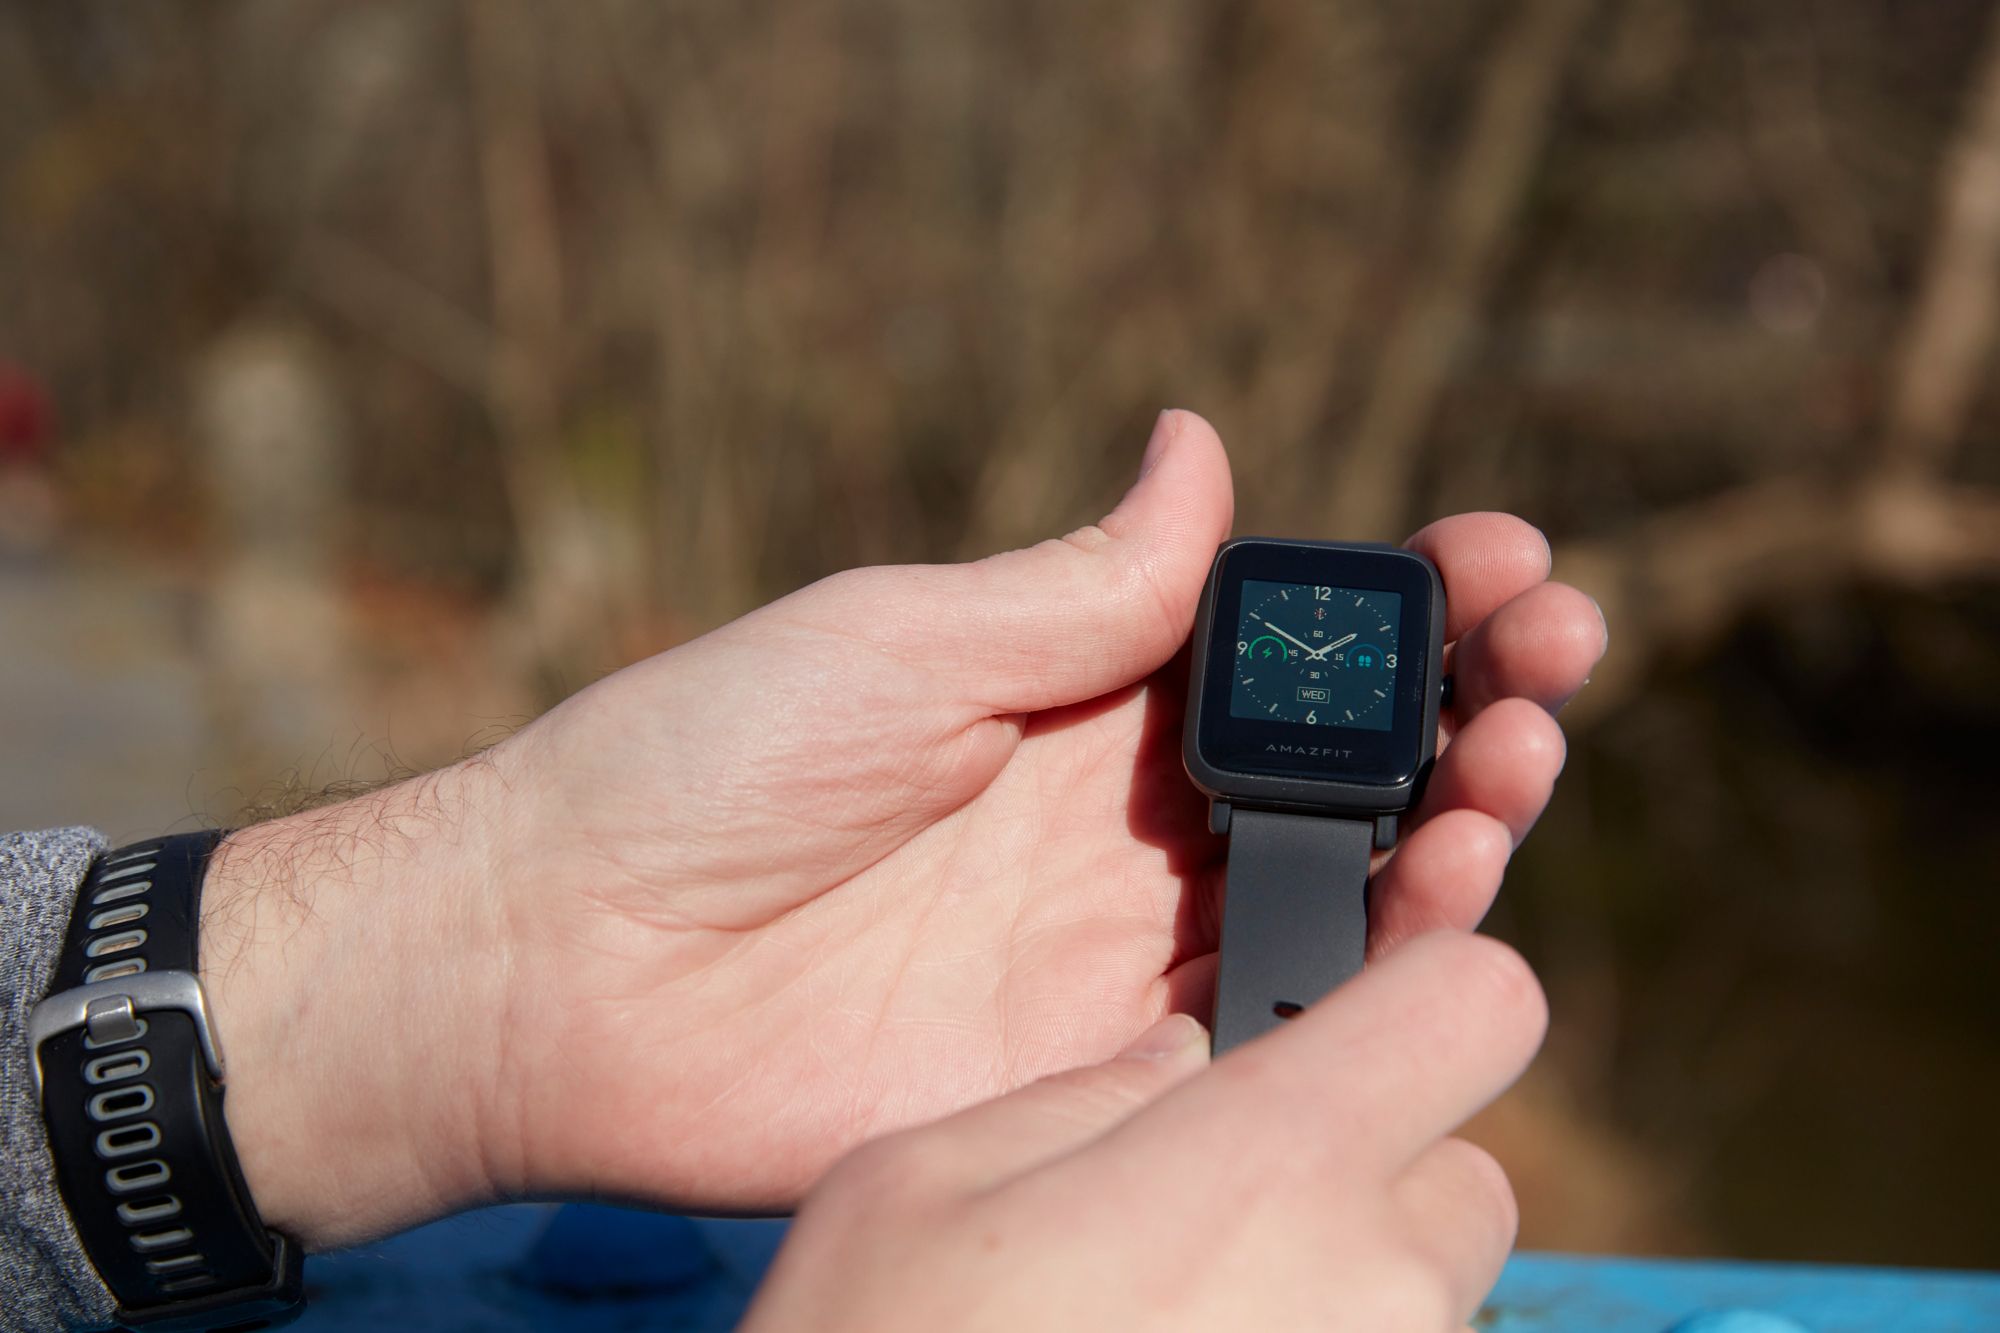 I used the Amazfit GTR Mini for 1 week and here is my experience